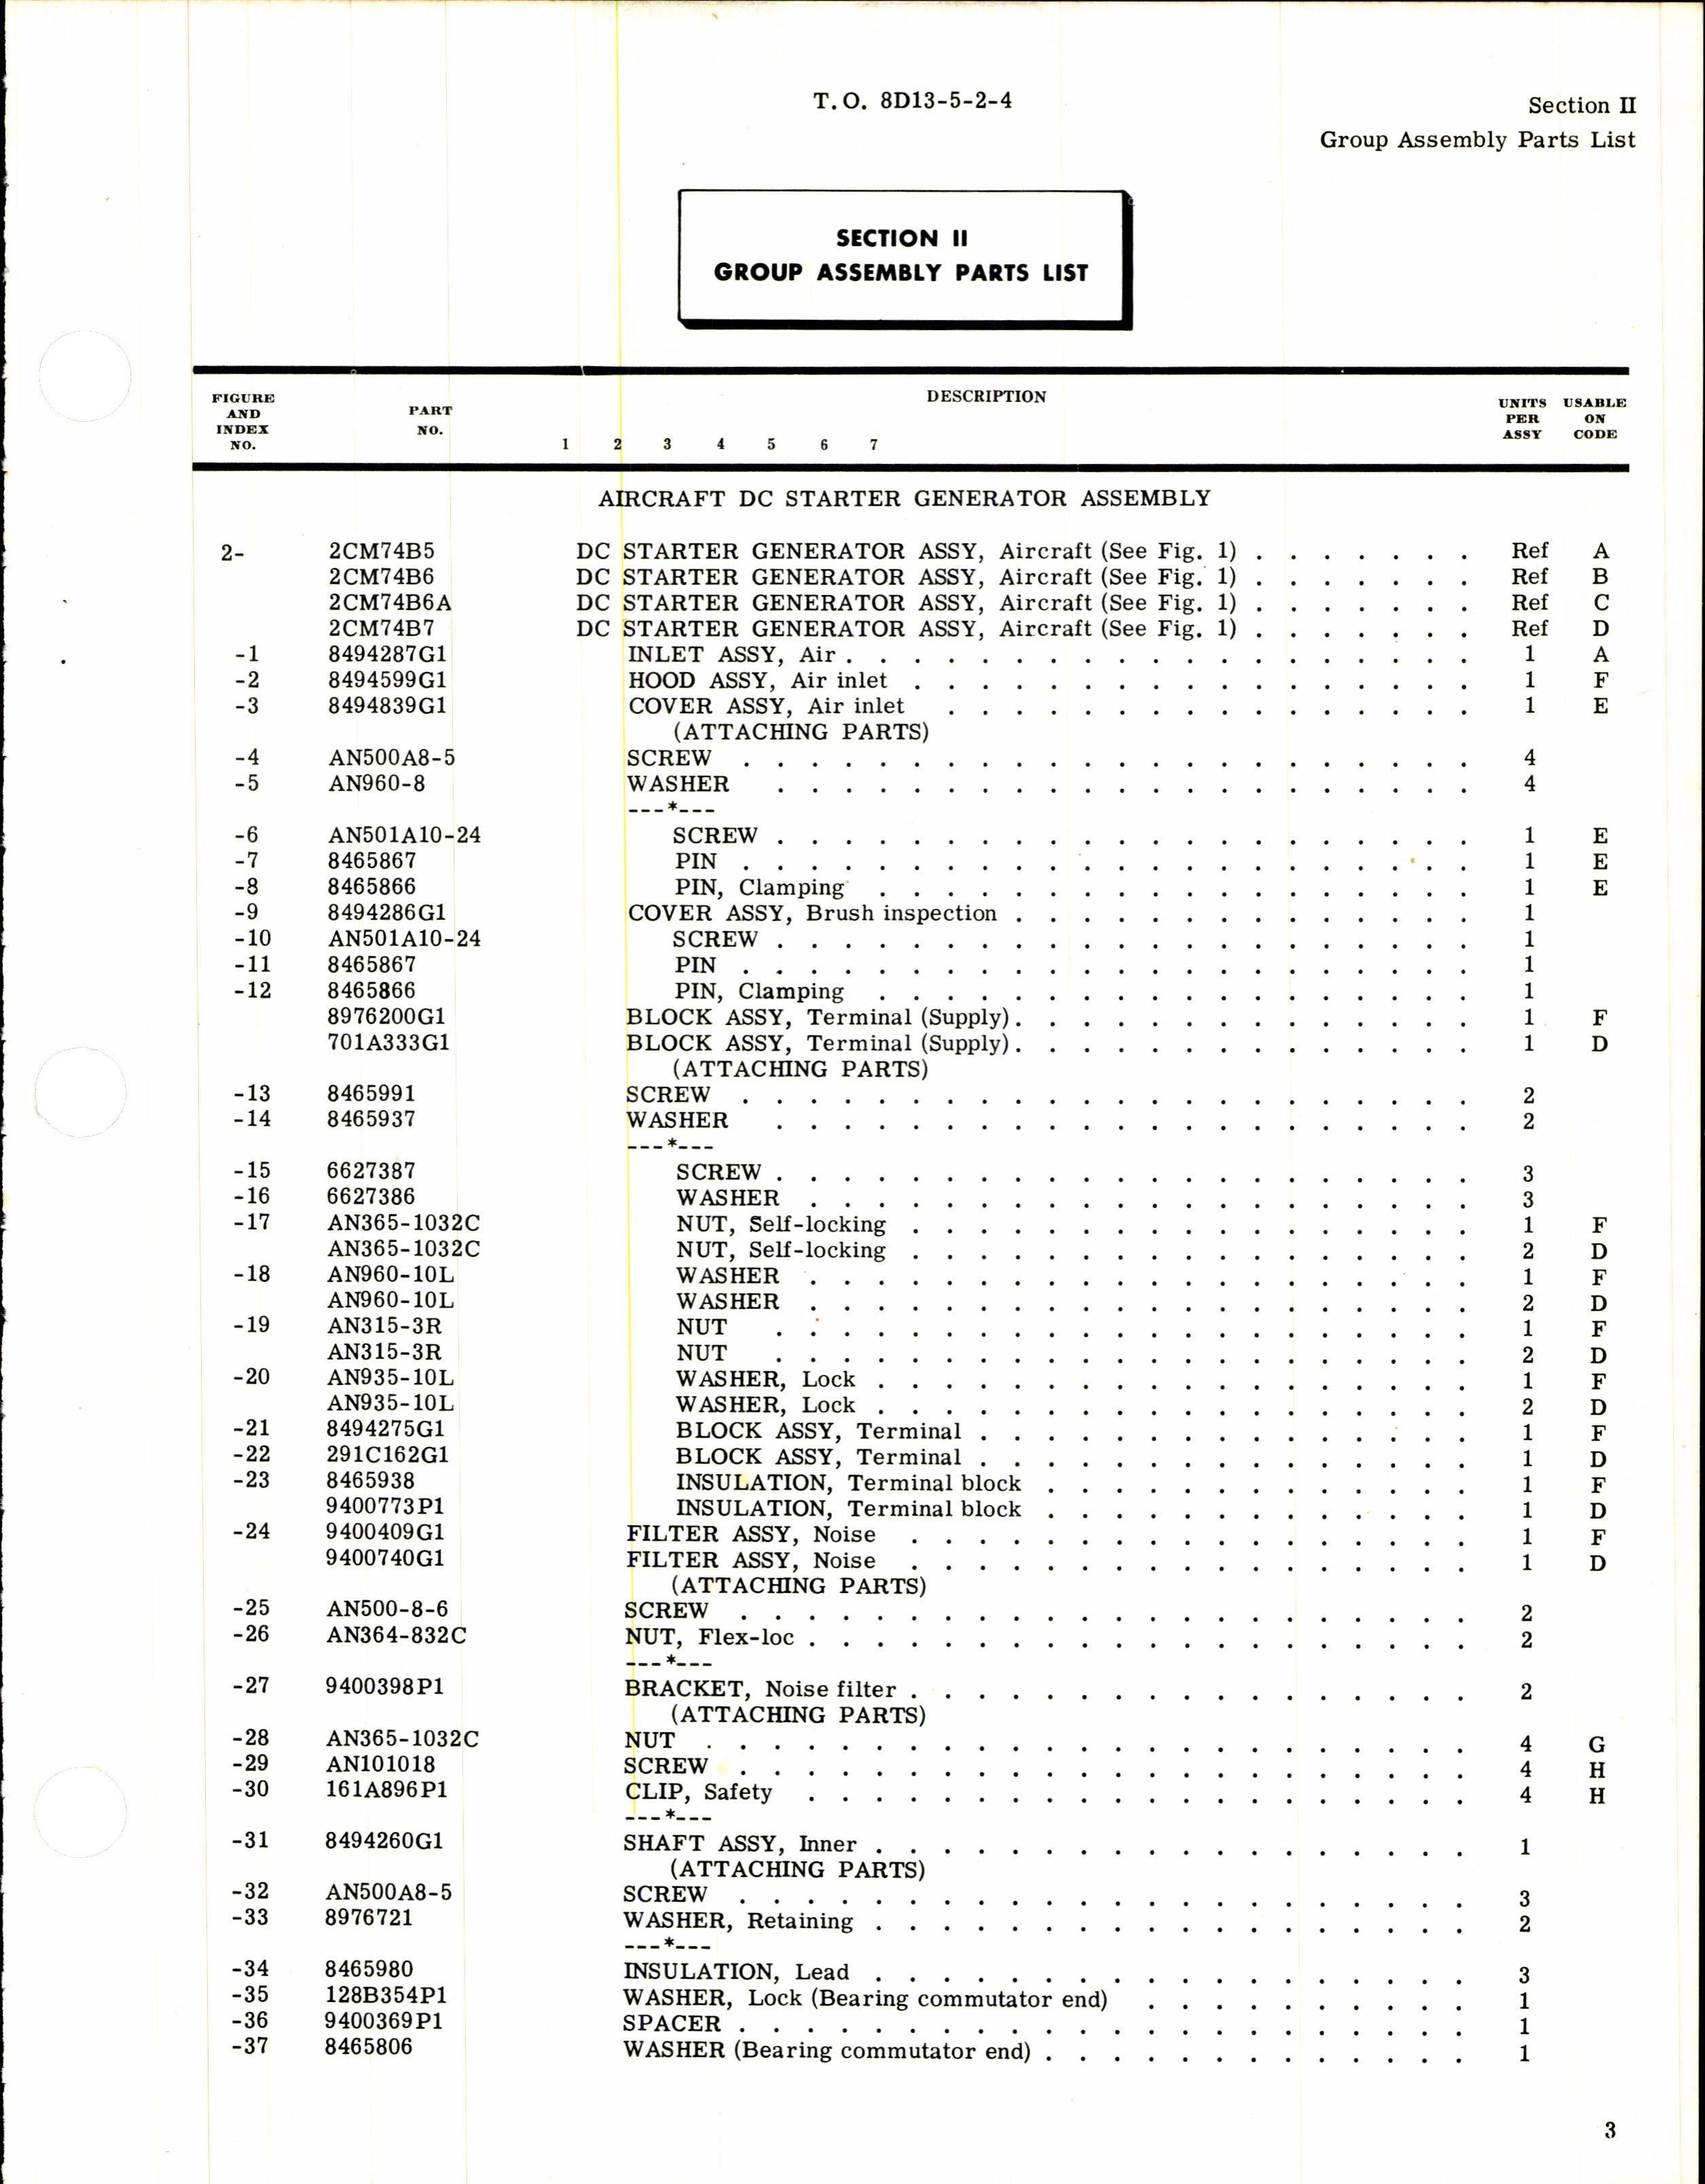 Sample page 3 from AirCorps Library document: Illustrated Parts Breakdown for GE Aircraft DC Starter Generator